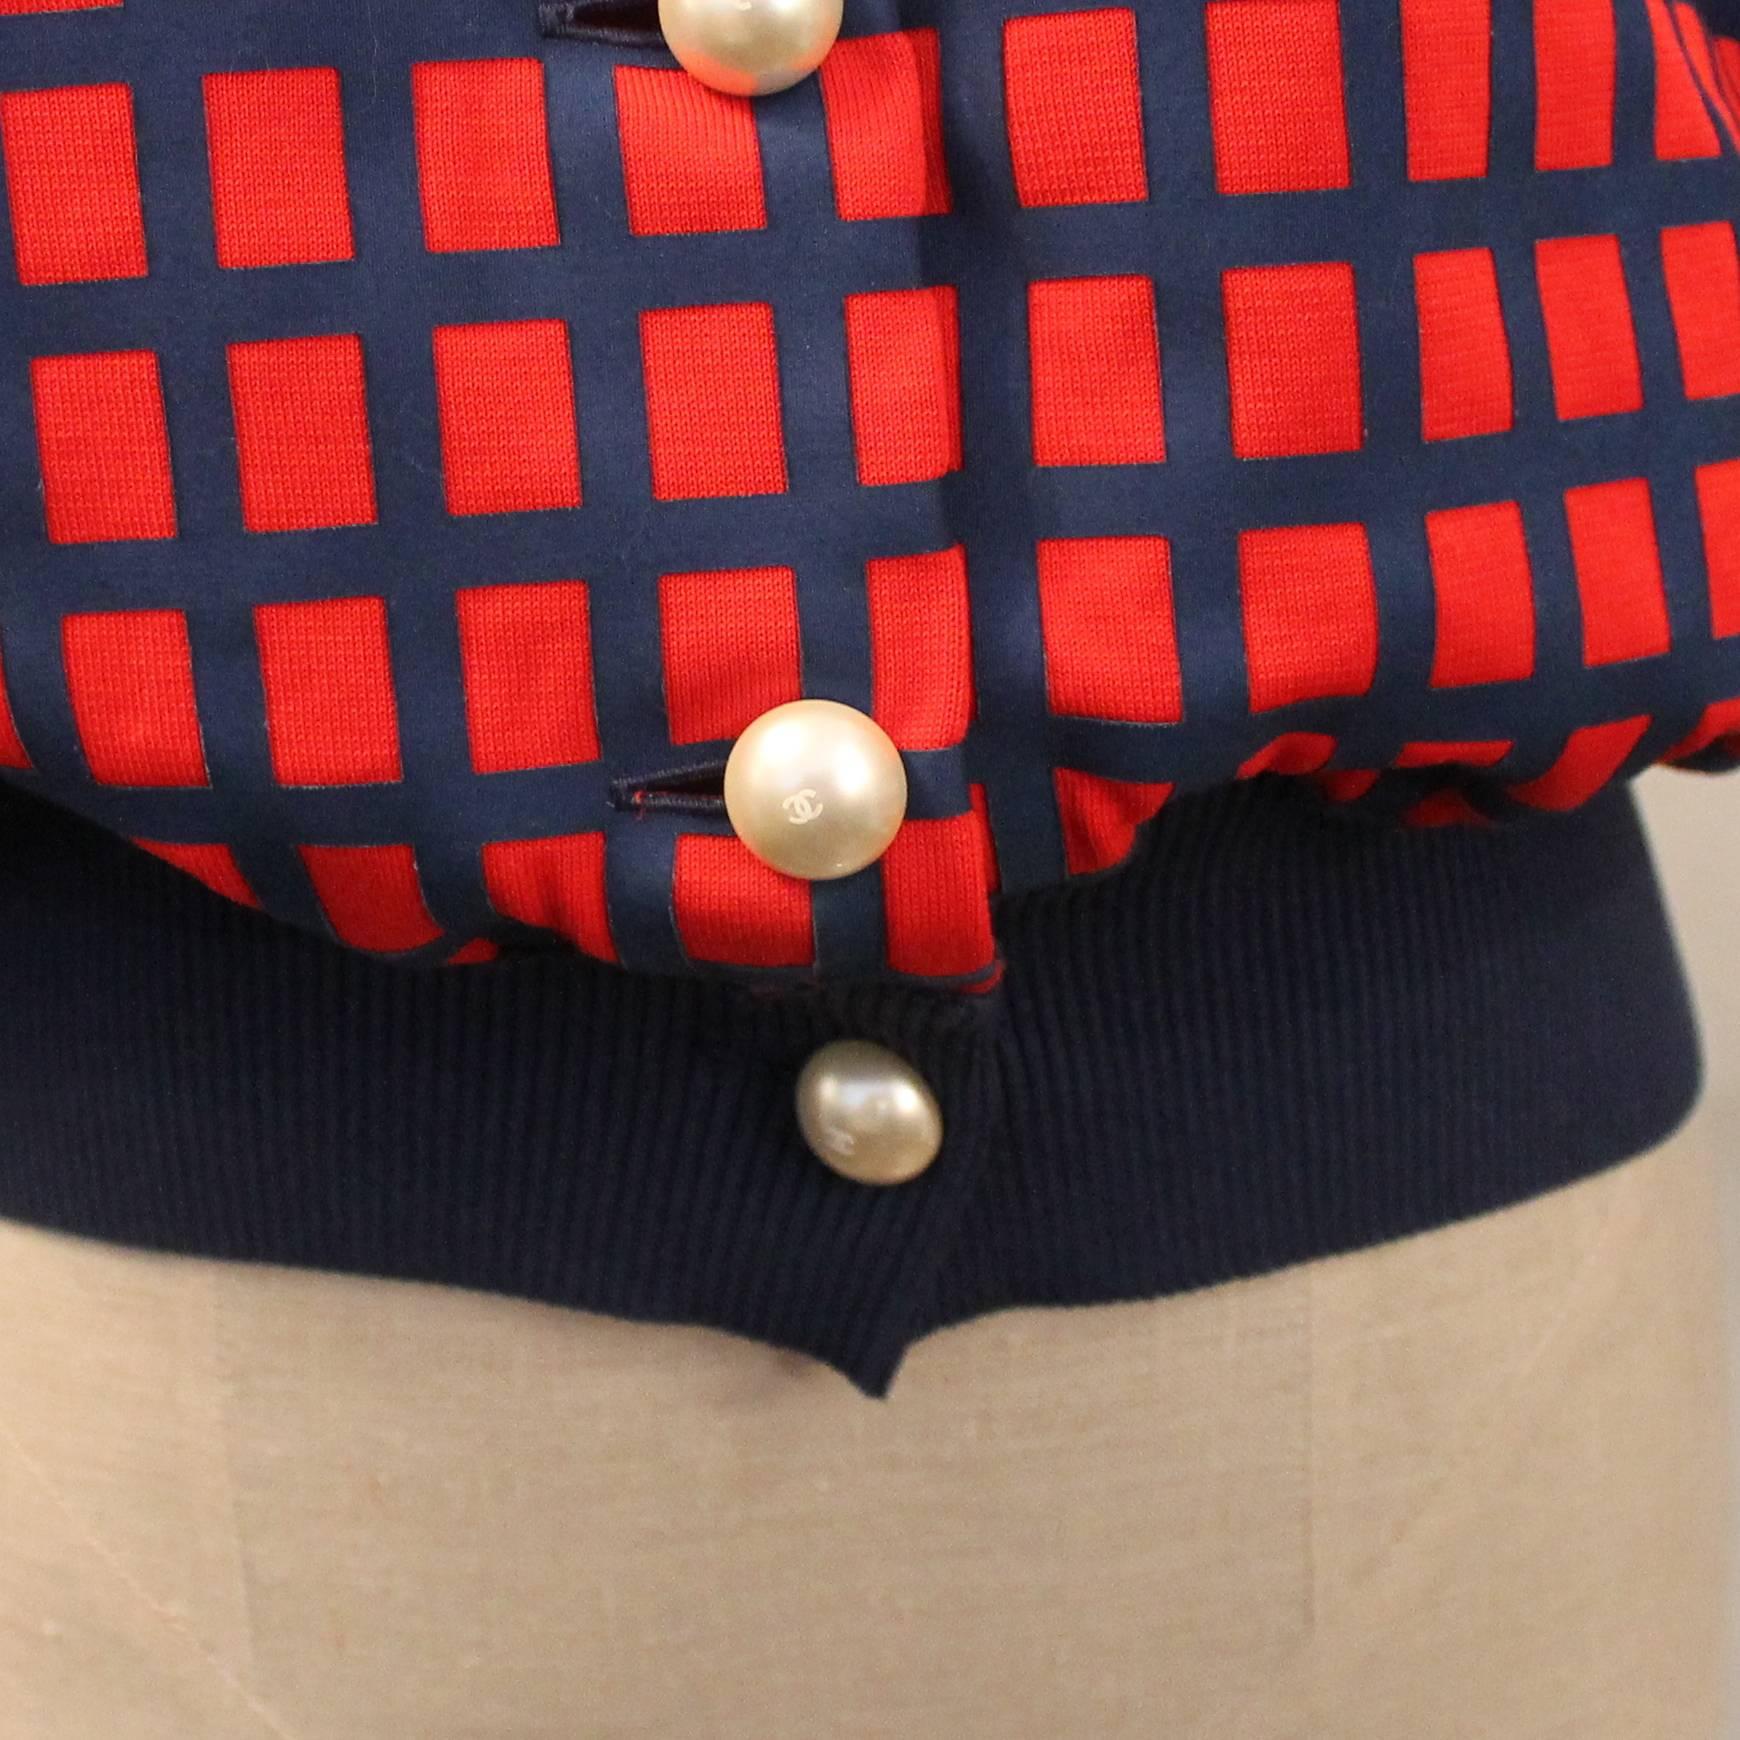 Women's Chanel Red and Blue Windowpane Print Jacket w/ Pearl Buttons - 42